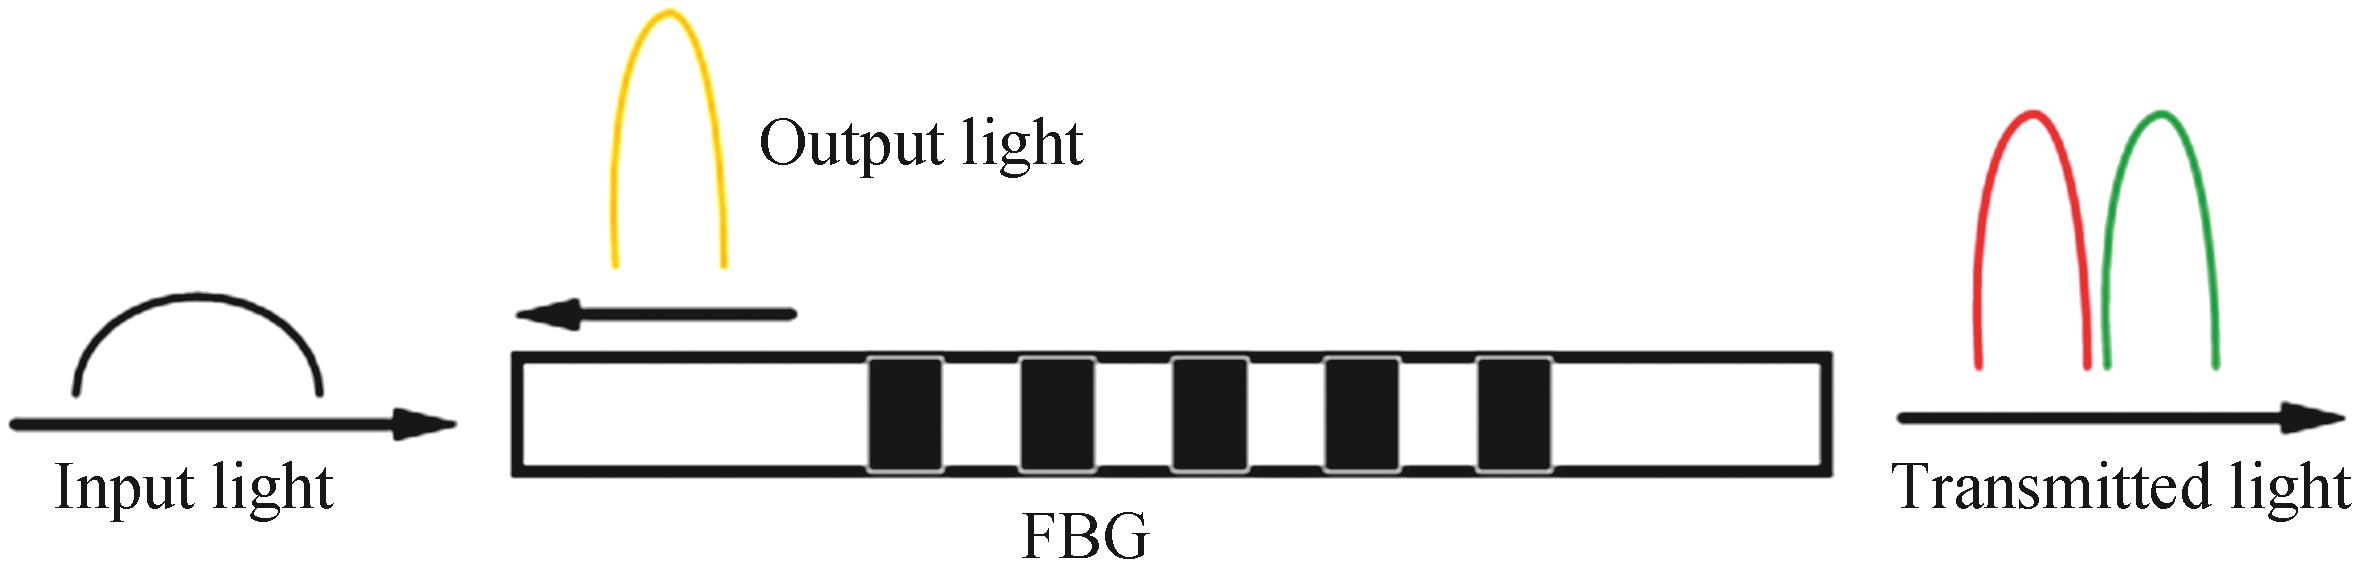 The transmission structure of the FBG